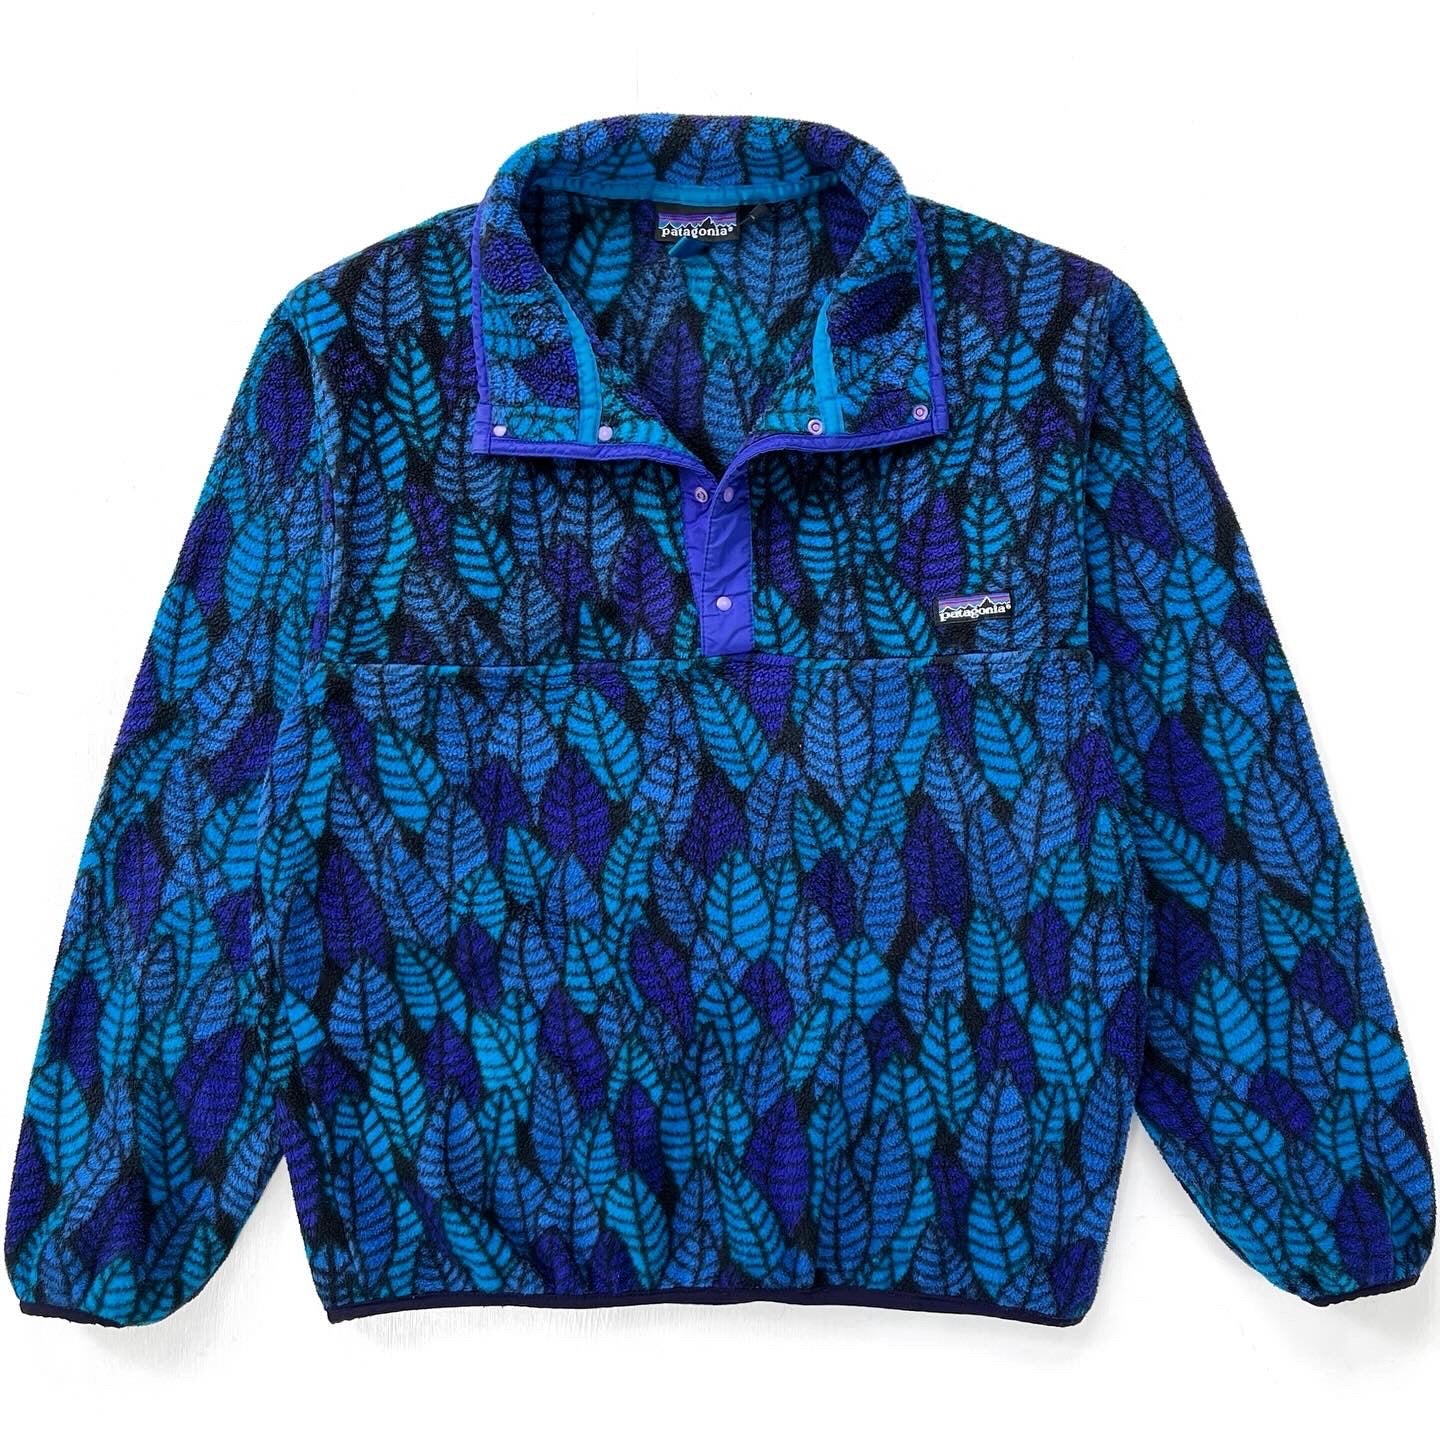 1992 Patagonia Printed Synchilla Snap-T, Spears: Sapphire (M)